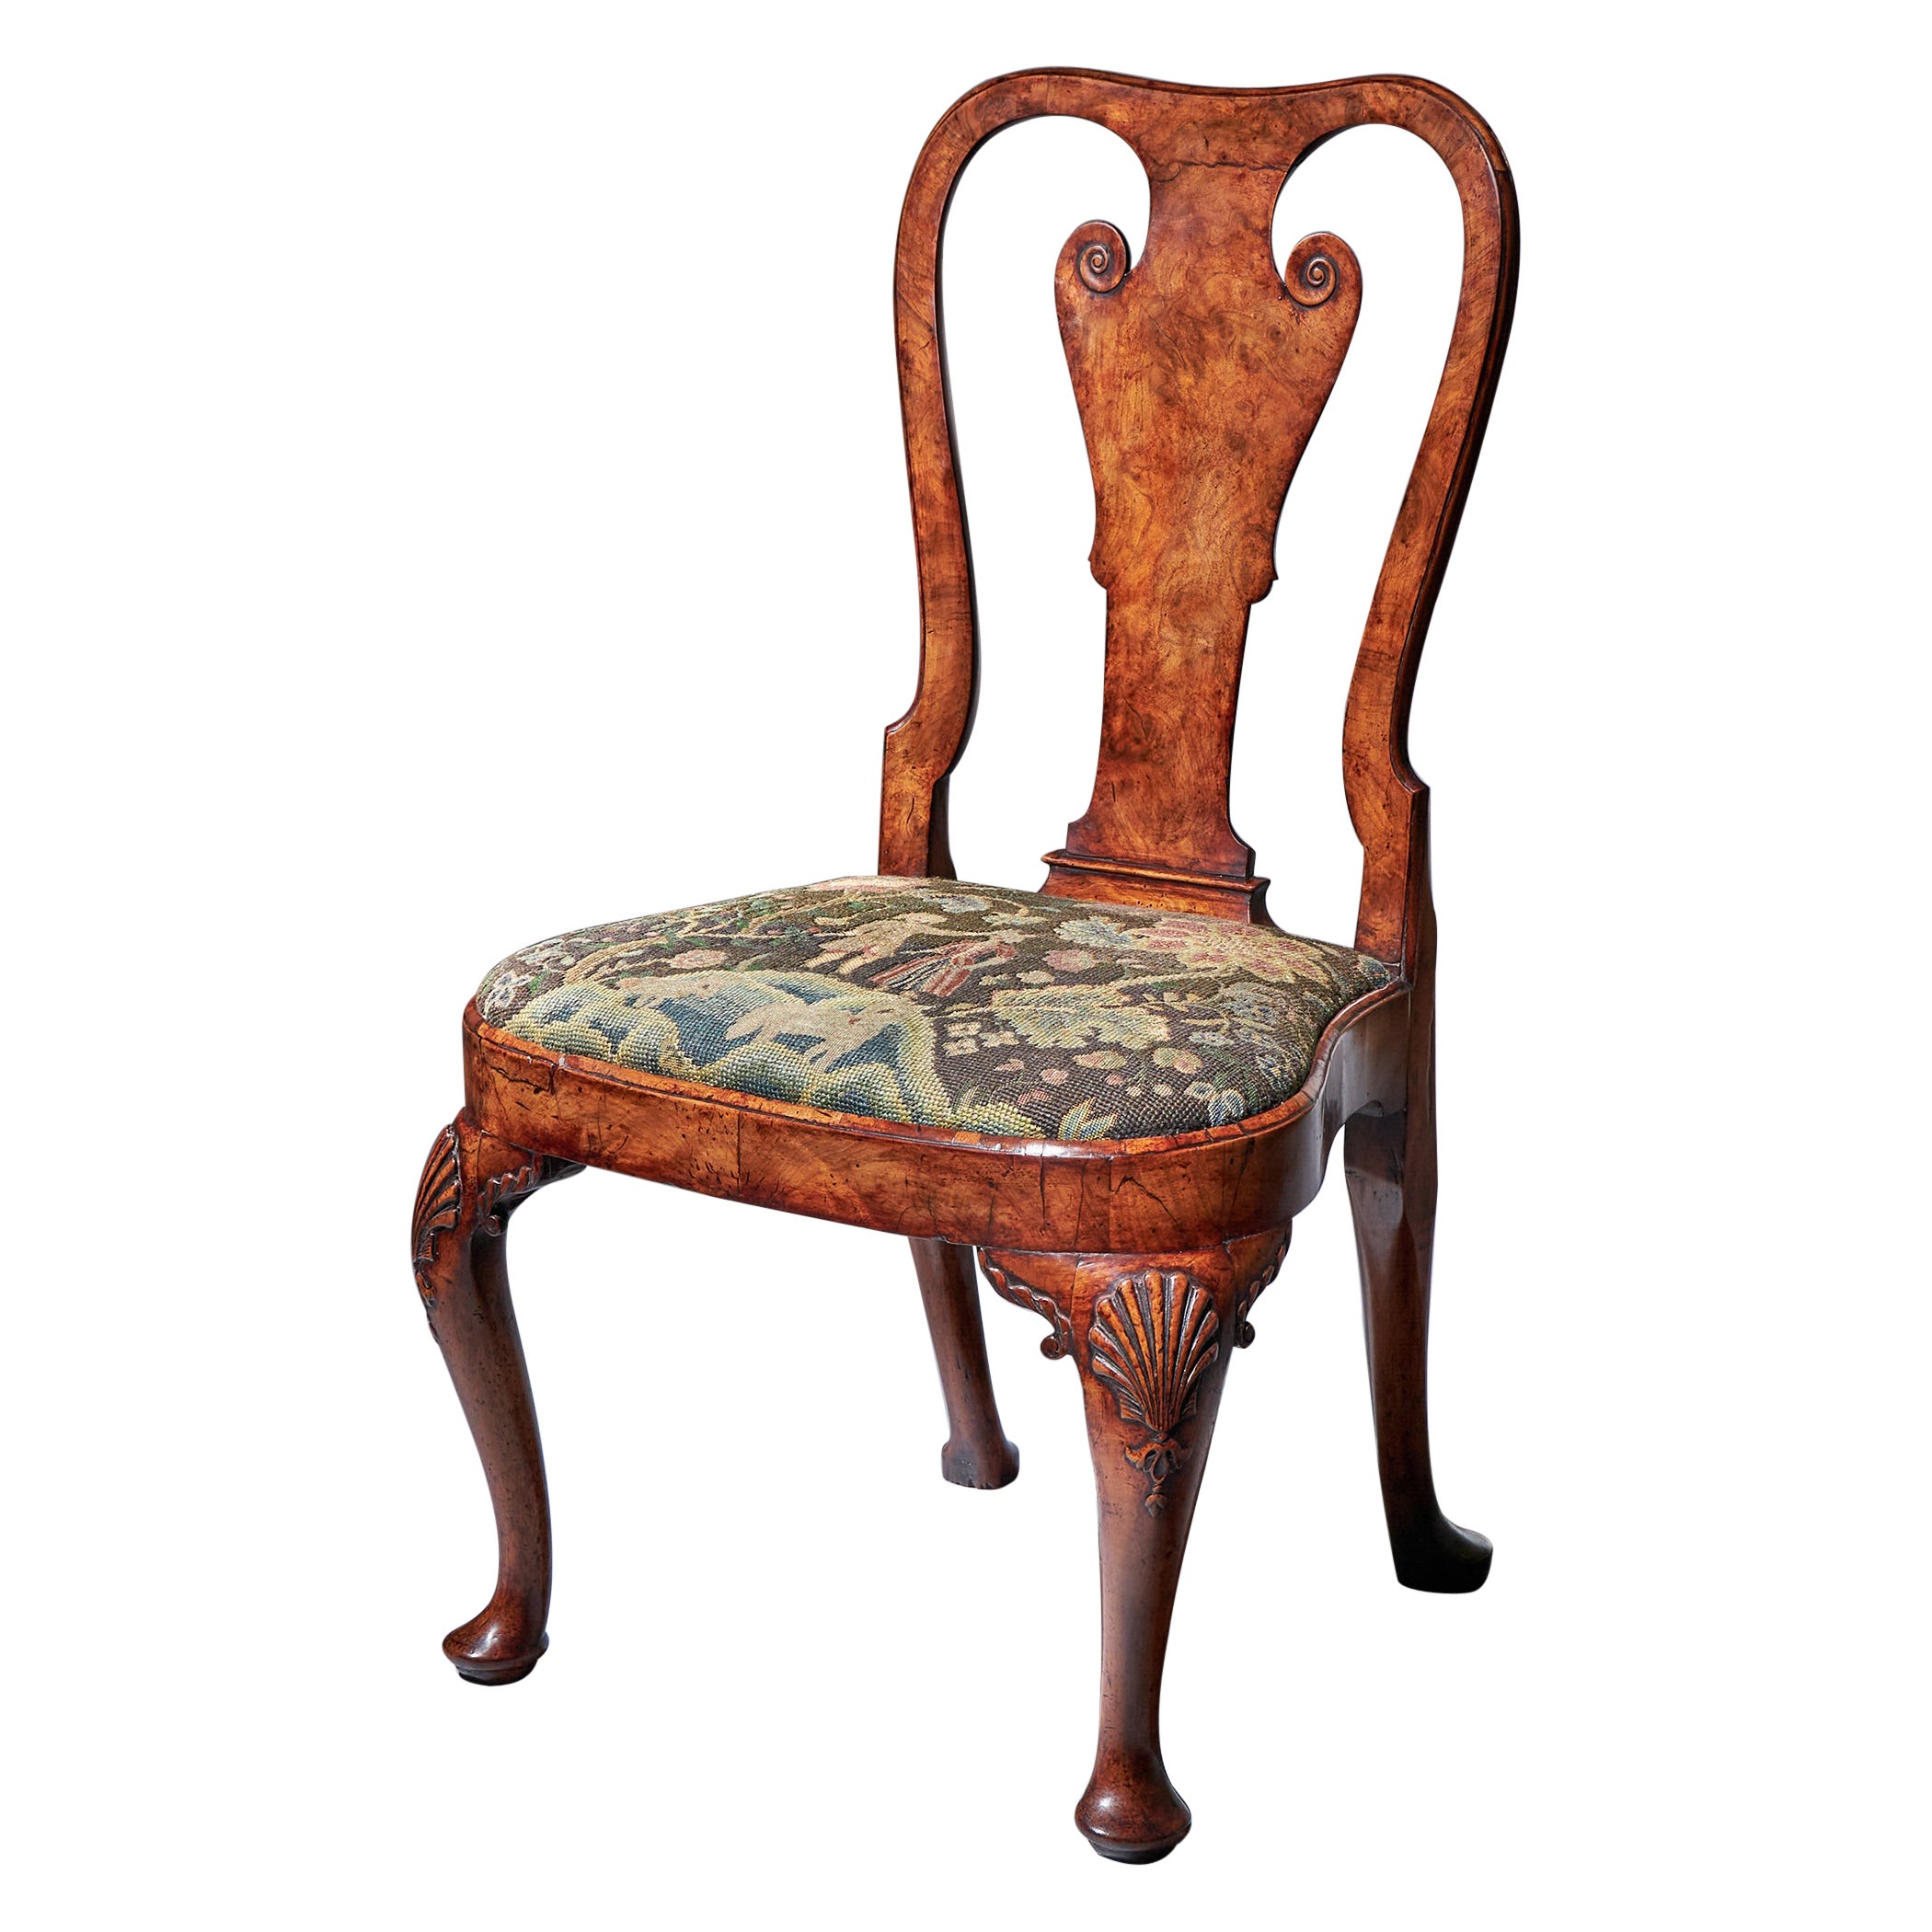 18th Century George I Carved Walnut Chair Covered in Period Needlework